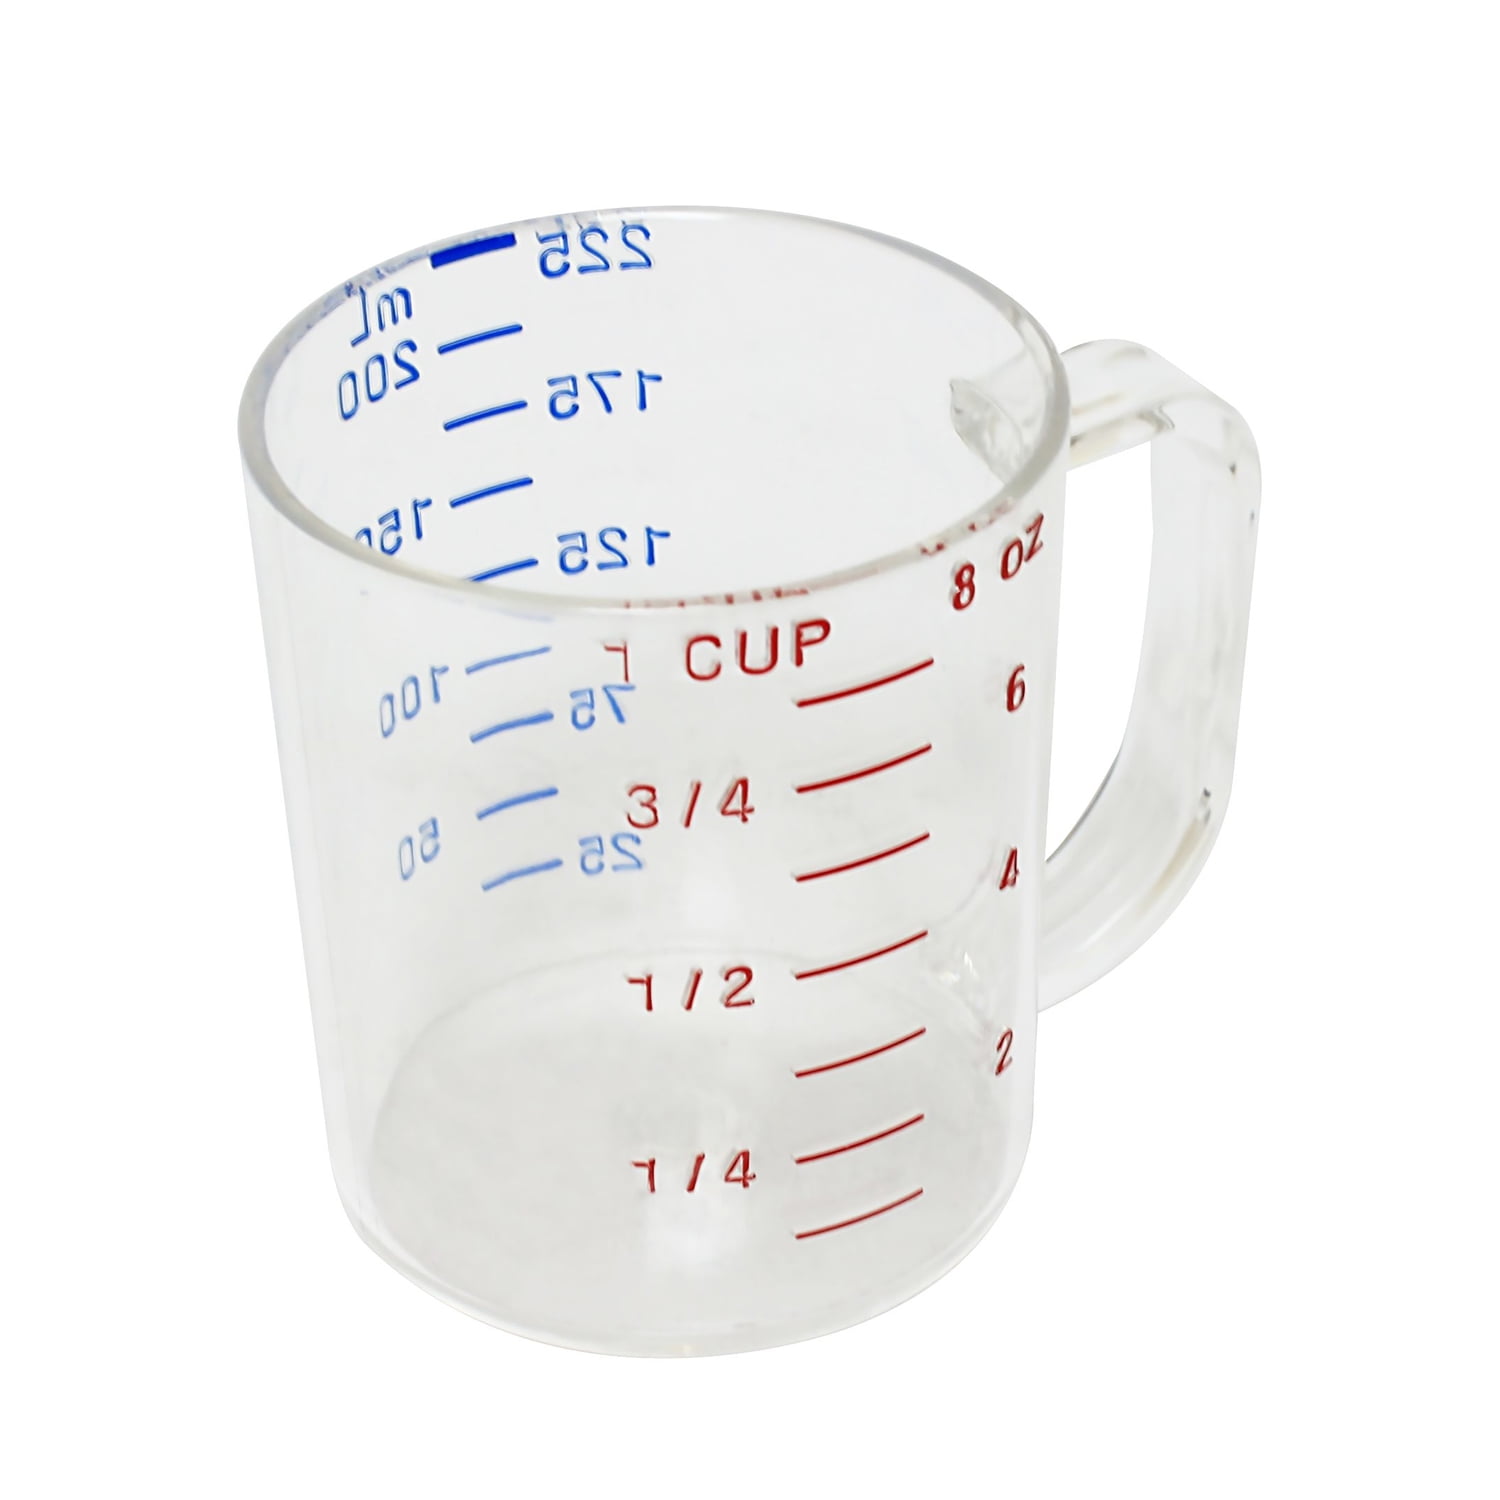 HUBERT® 1 Cup Clear Polycarbonate Measuring Cup